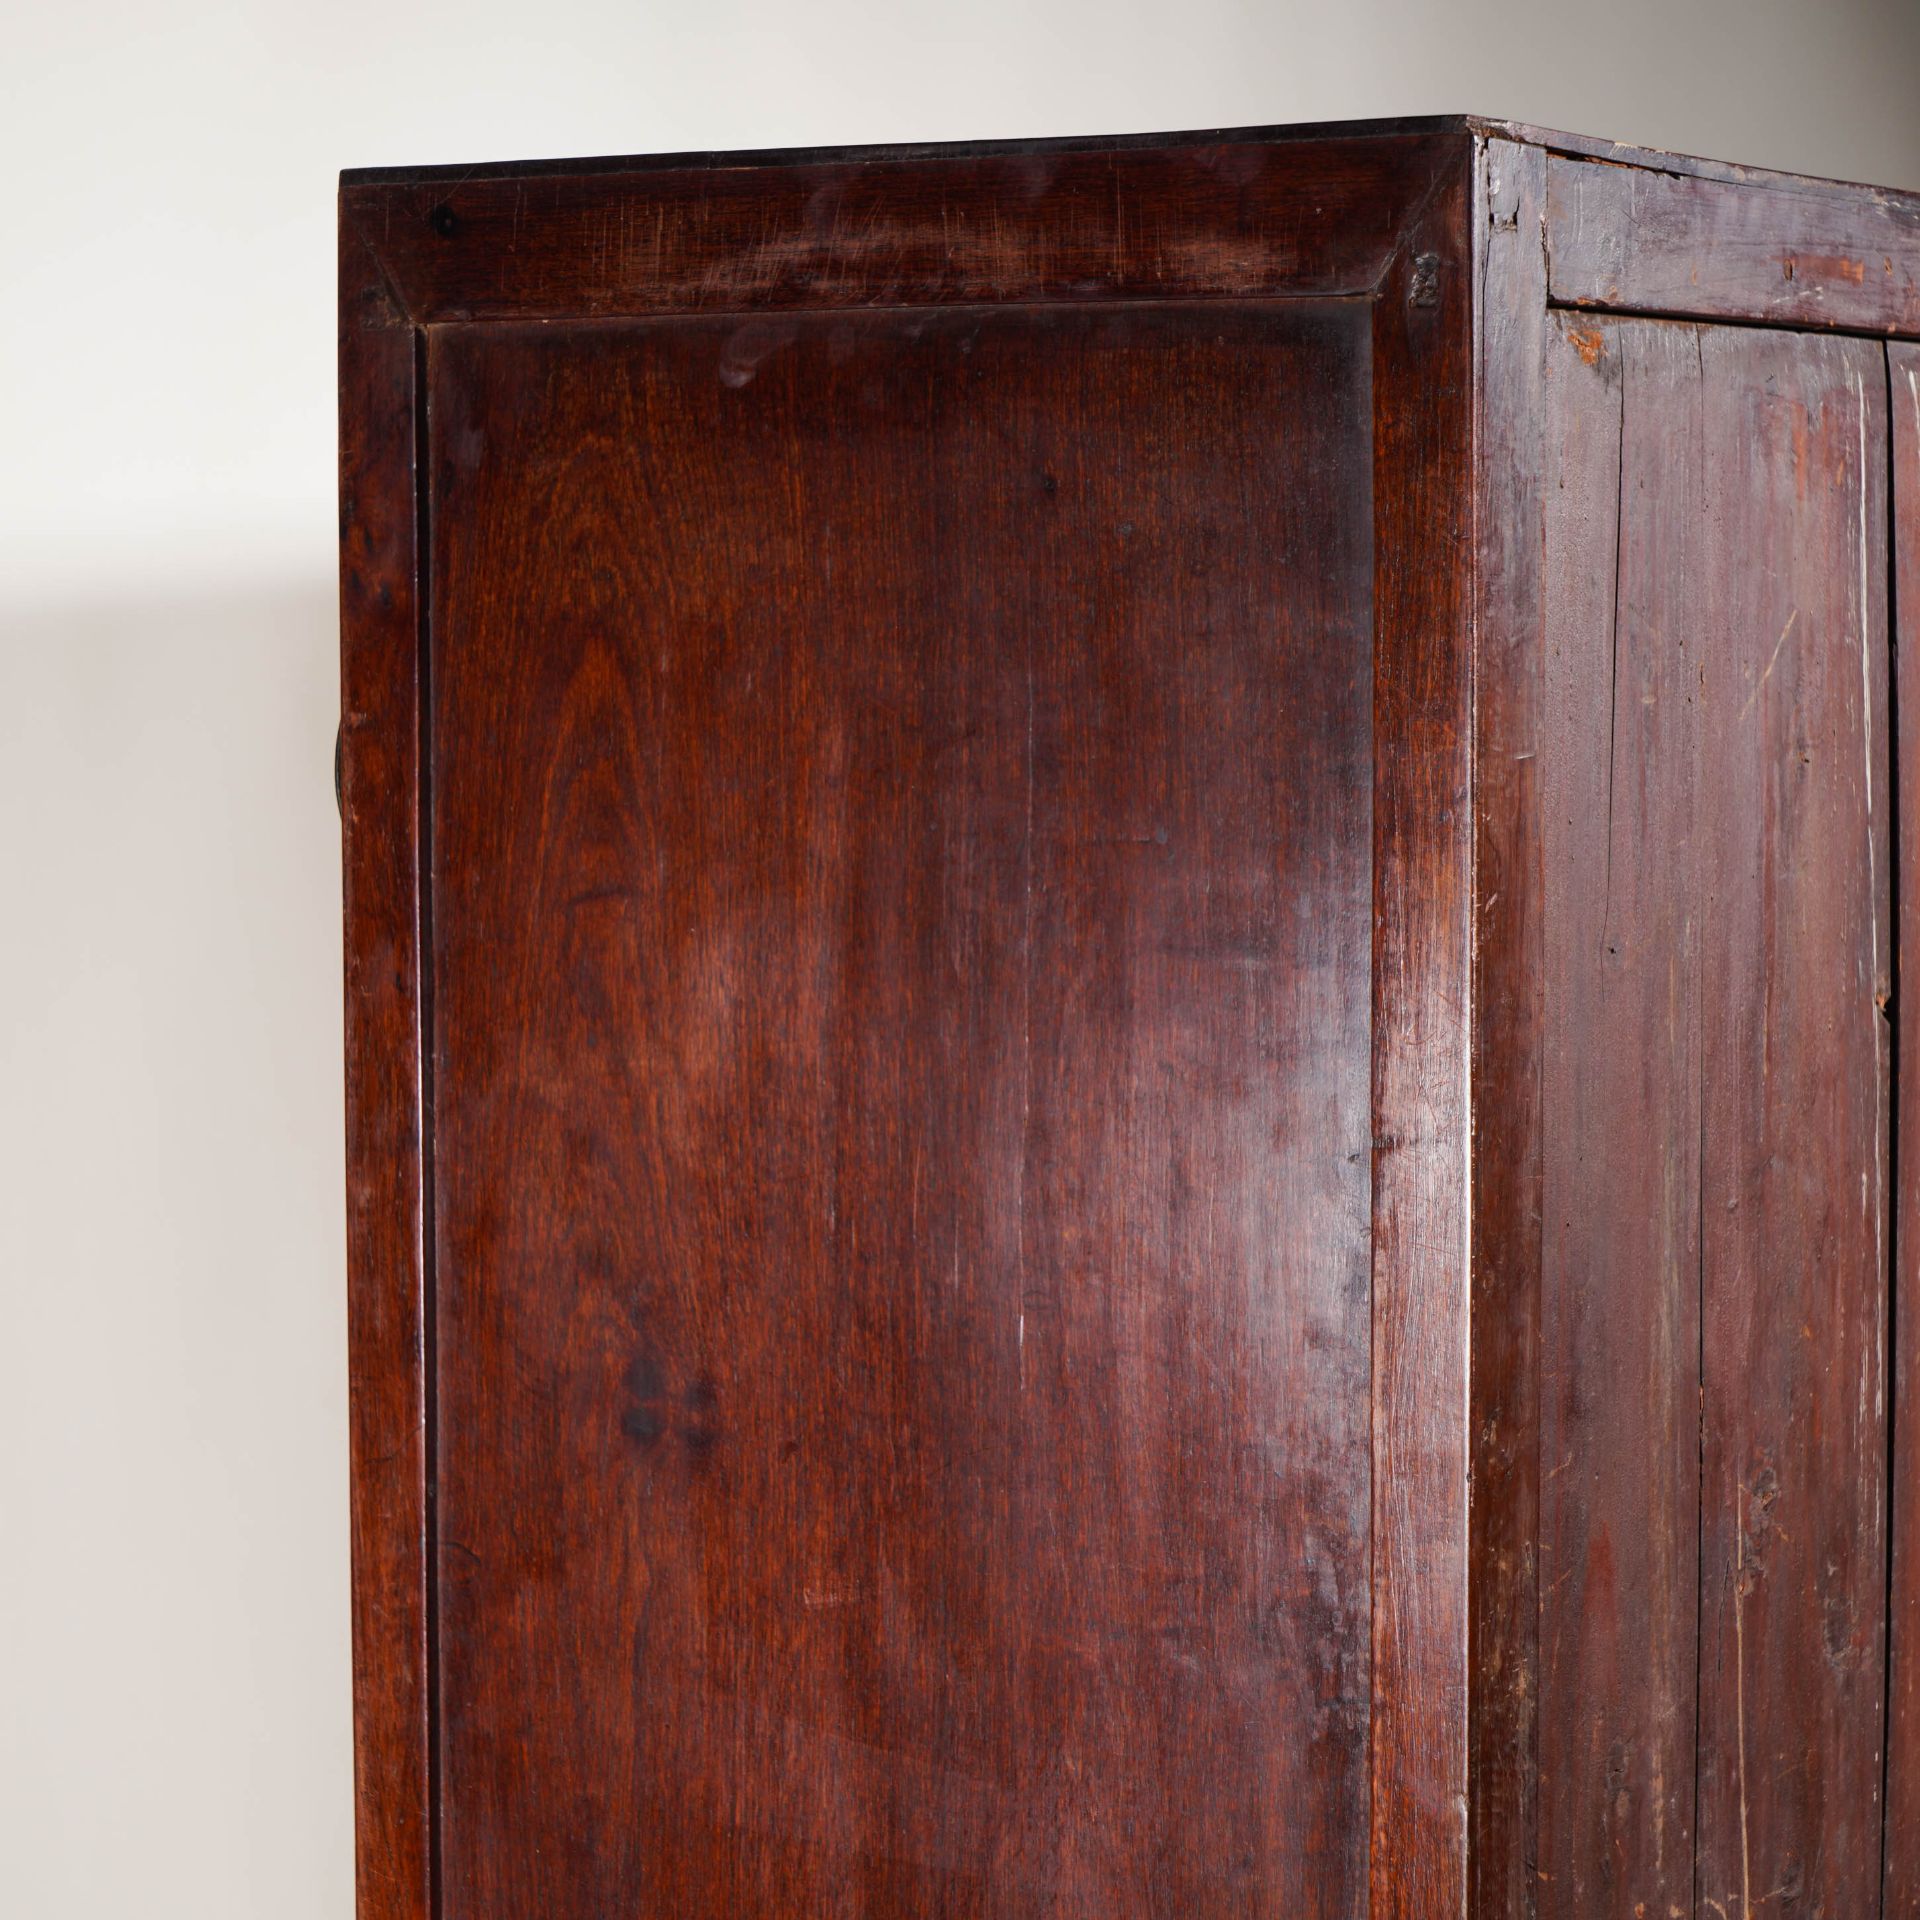 Huanghua pear square corner cabinet  from  the Qing  dynasty - Image 10 of 11